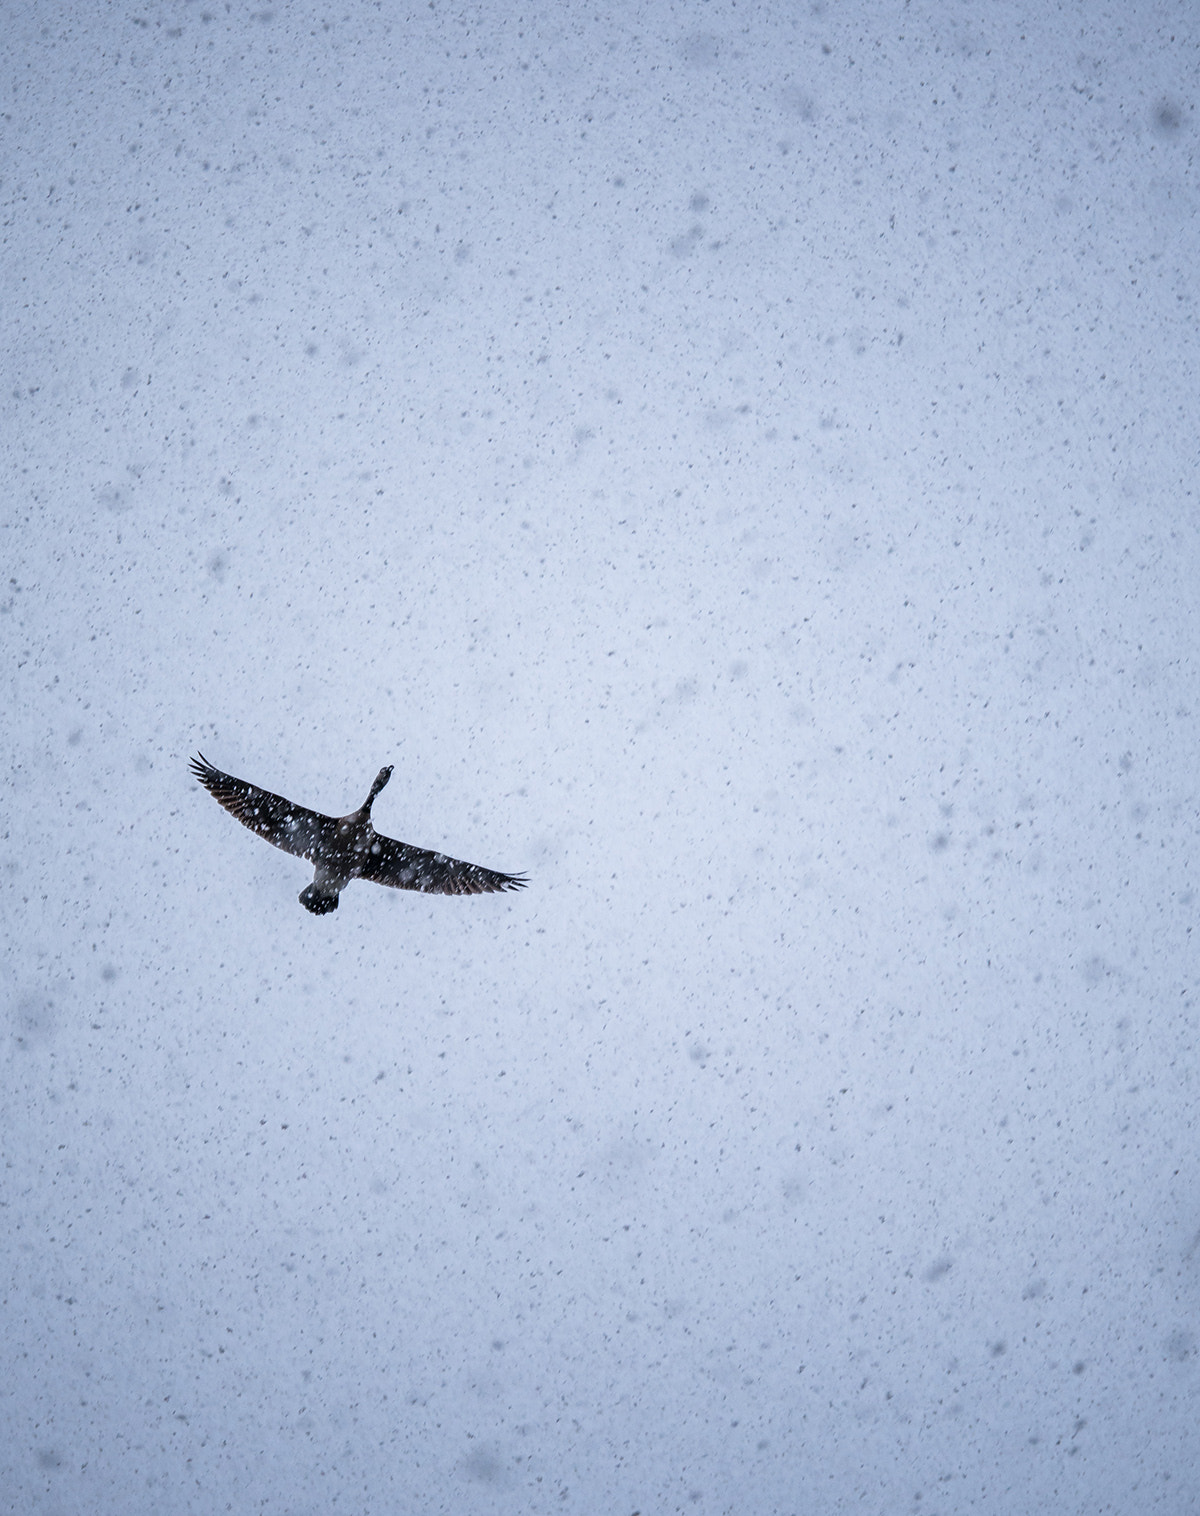 Panasonic Lumix DMC-G85 (Lumix DMC-G80) + Panasonic Lumix G X Vario 35-100mm F2.8 OIS sample photo. Fly in the snow photography